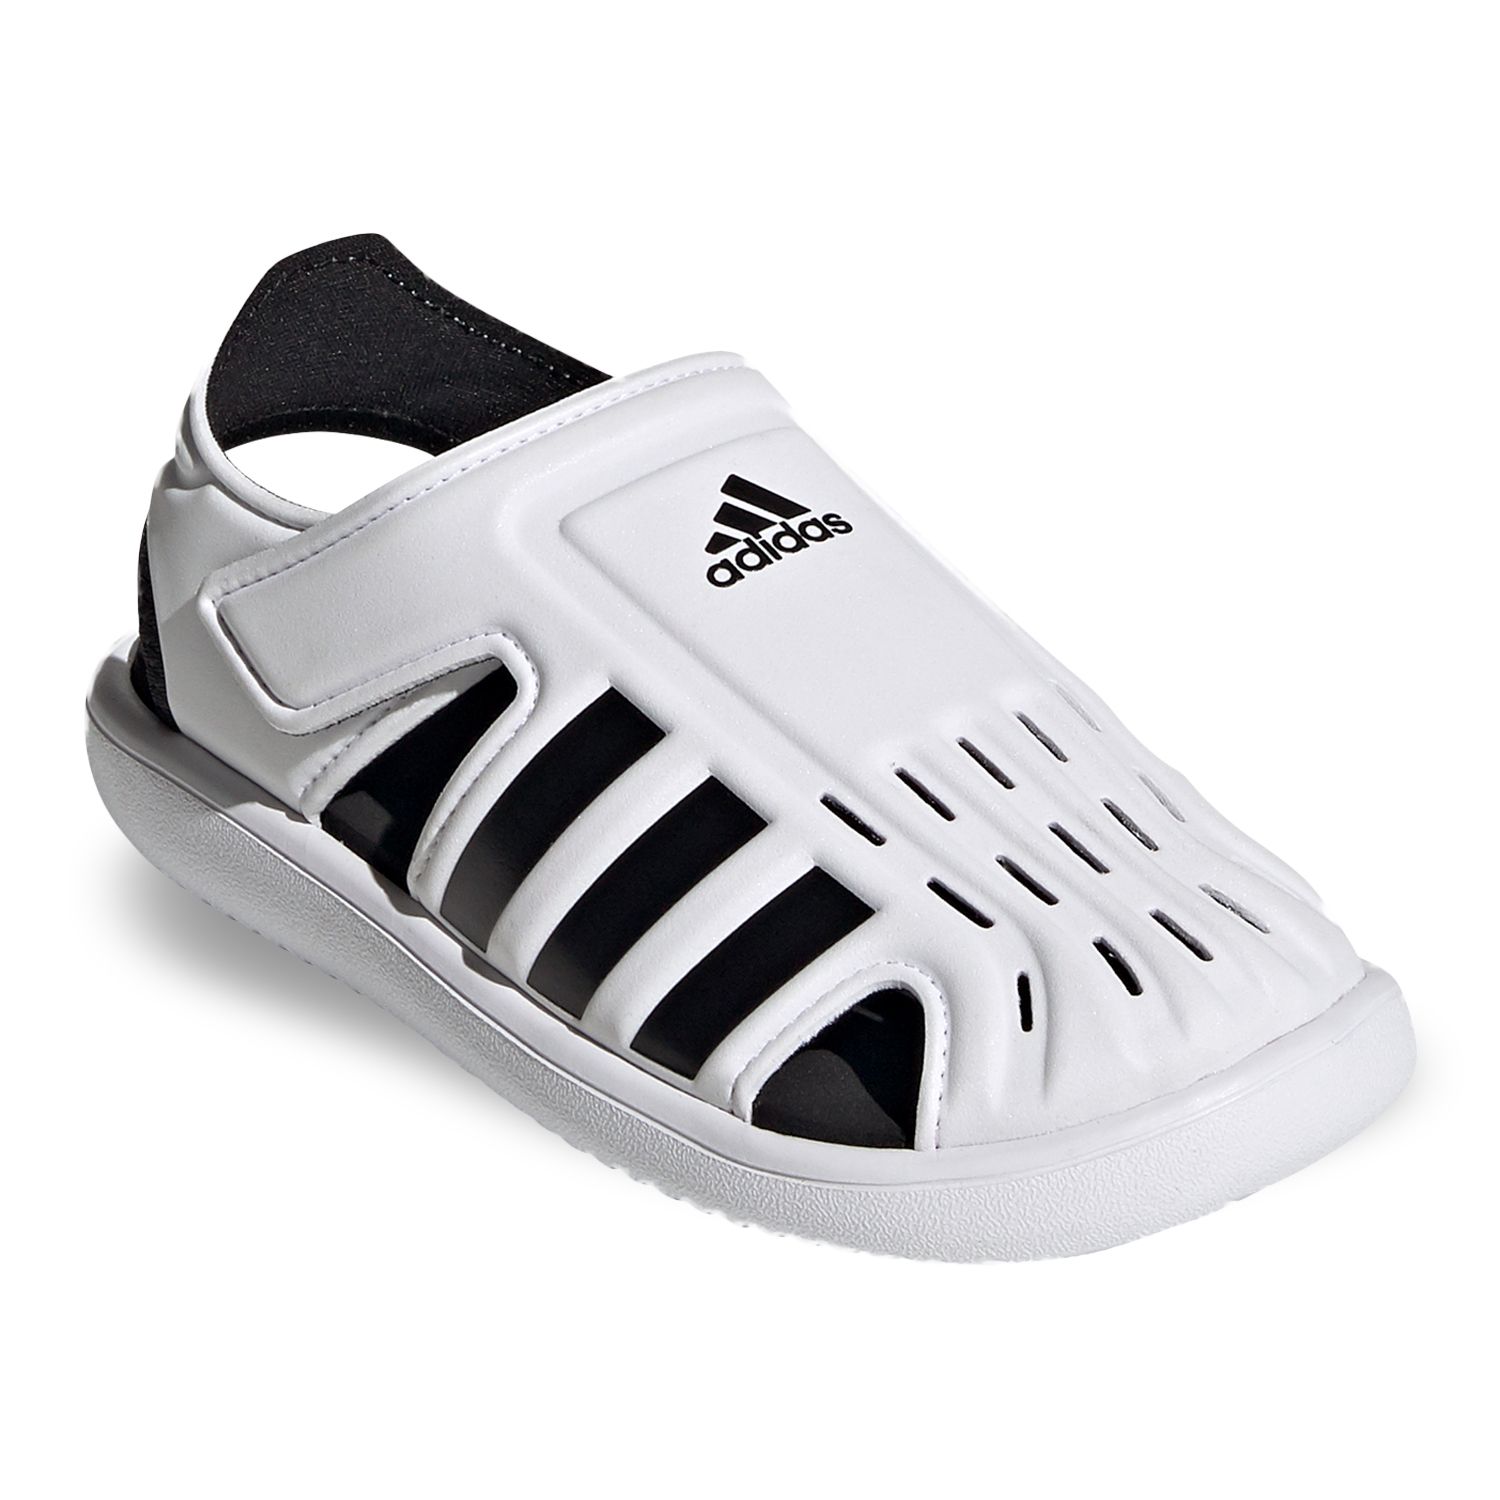 toddlers adidas sandals